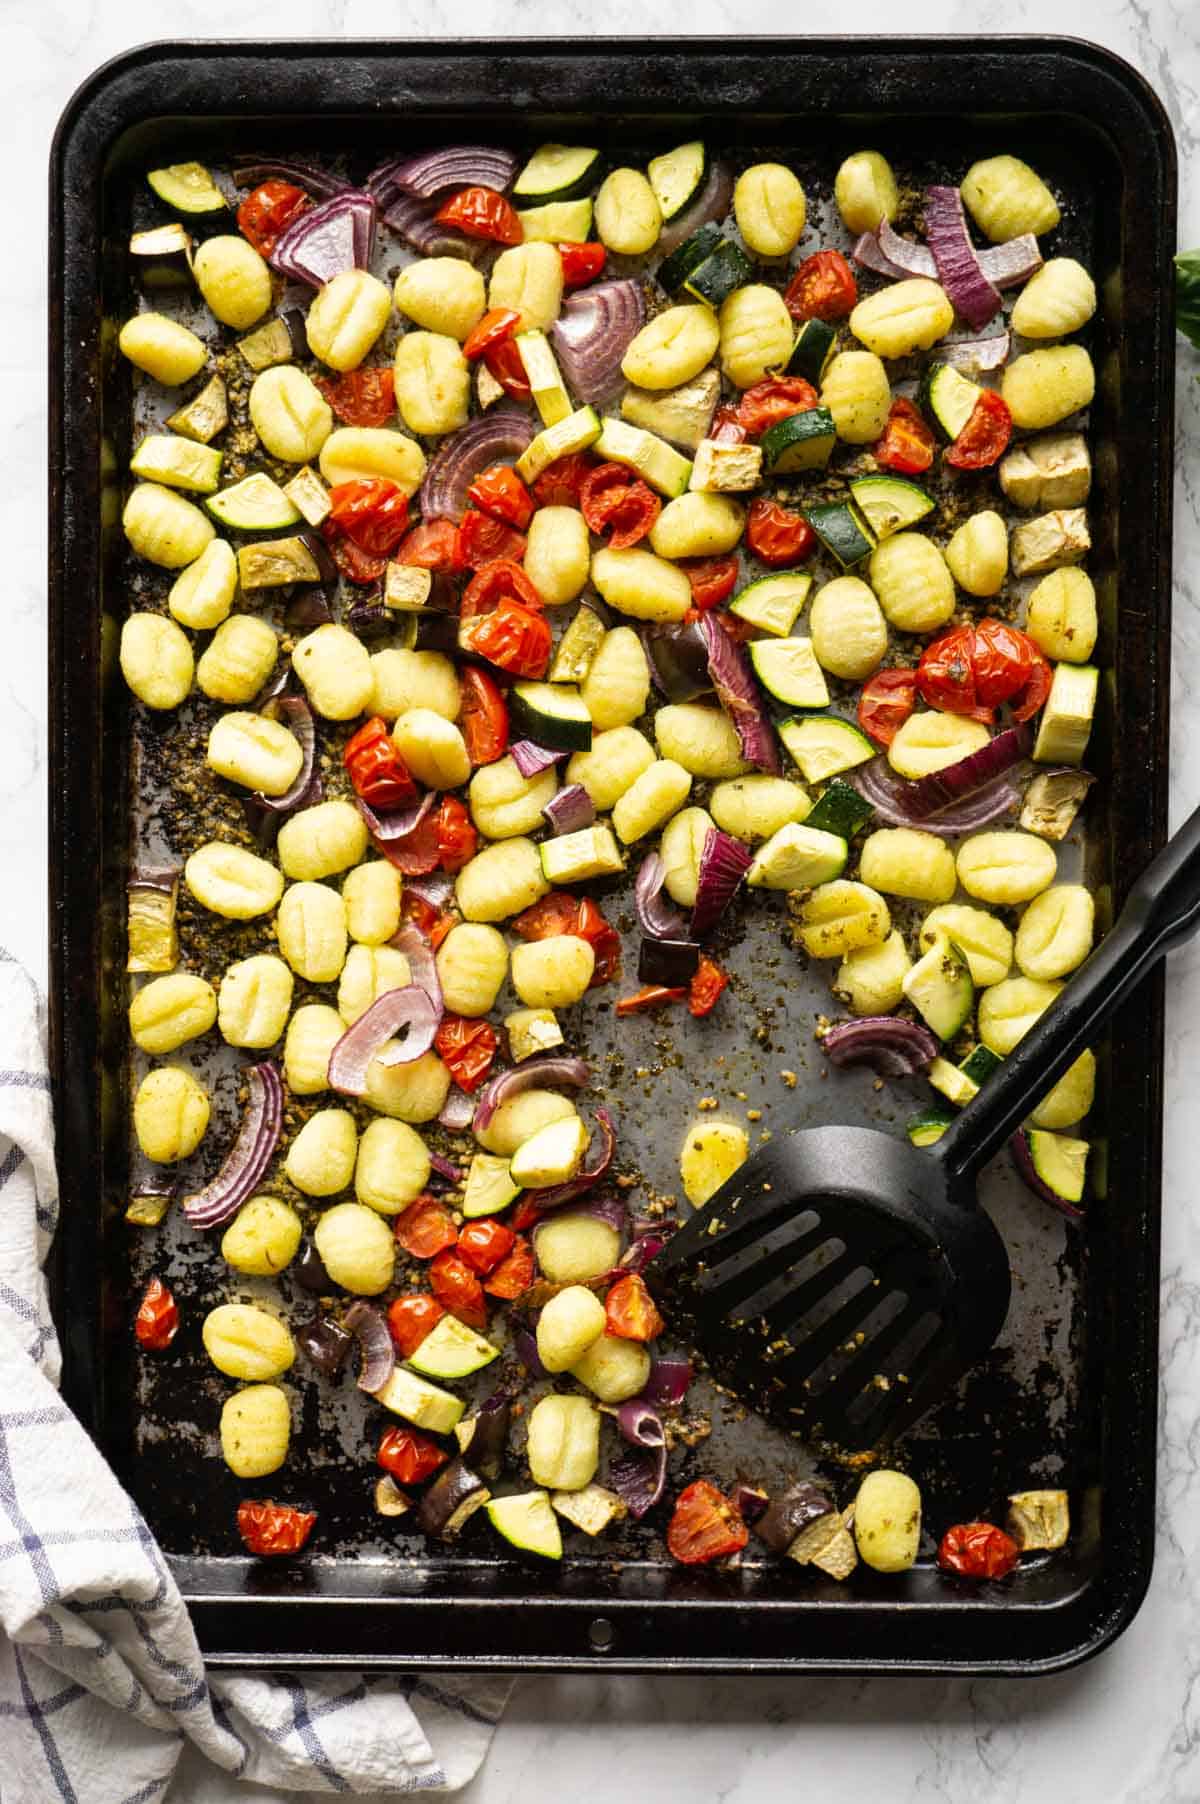 Pesto Gnocchi Sheet Pan dinner with tomatoes, eggplant, zucchini, and red onions